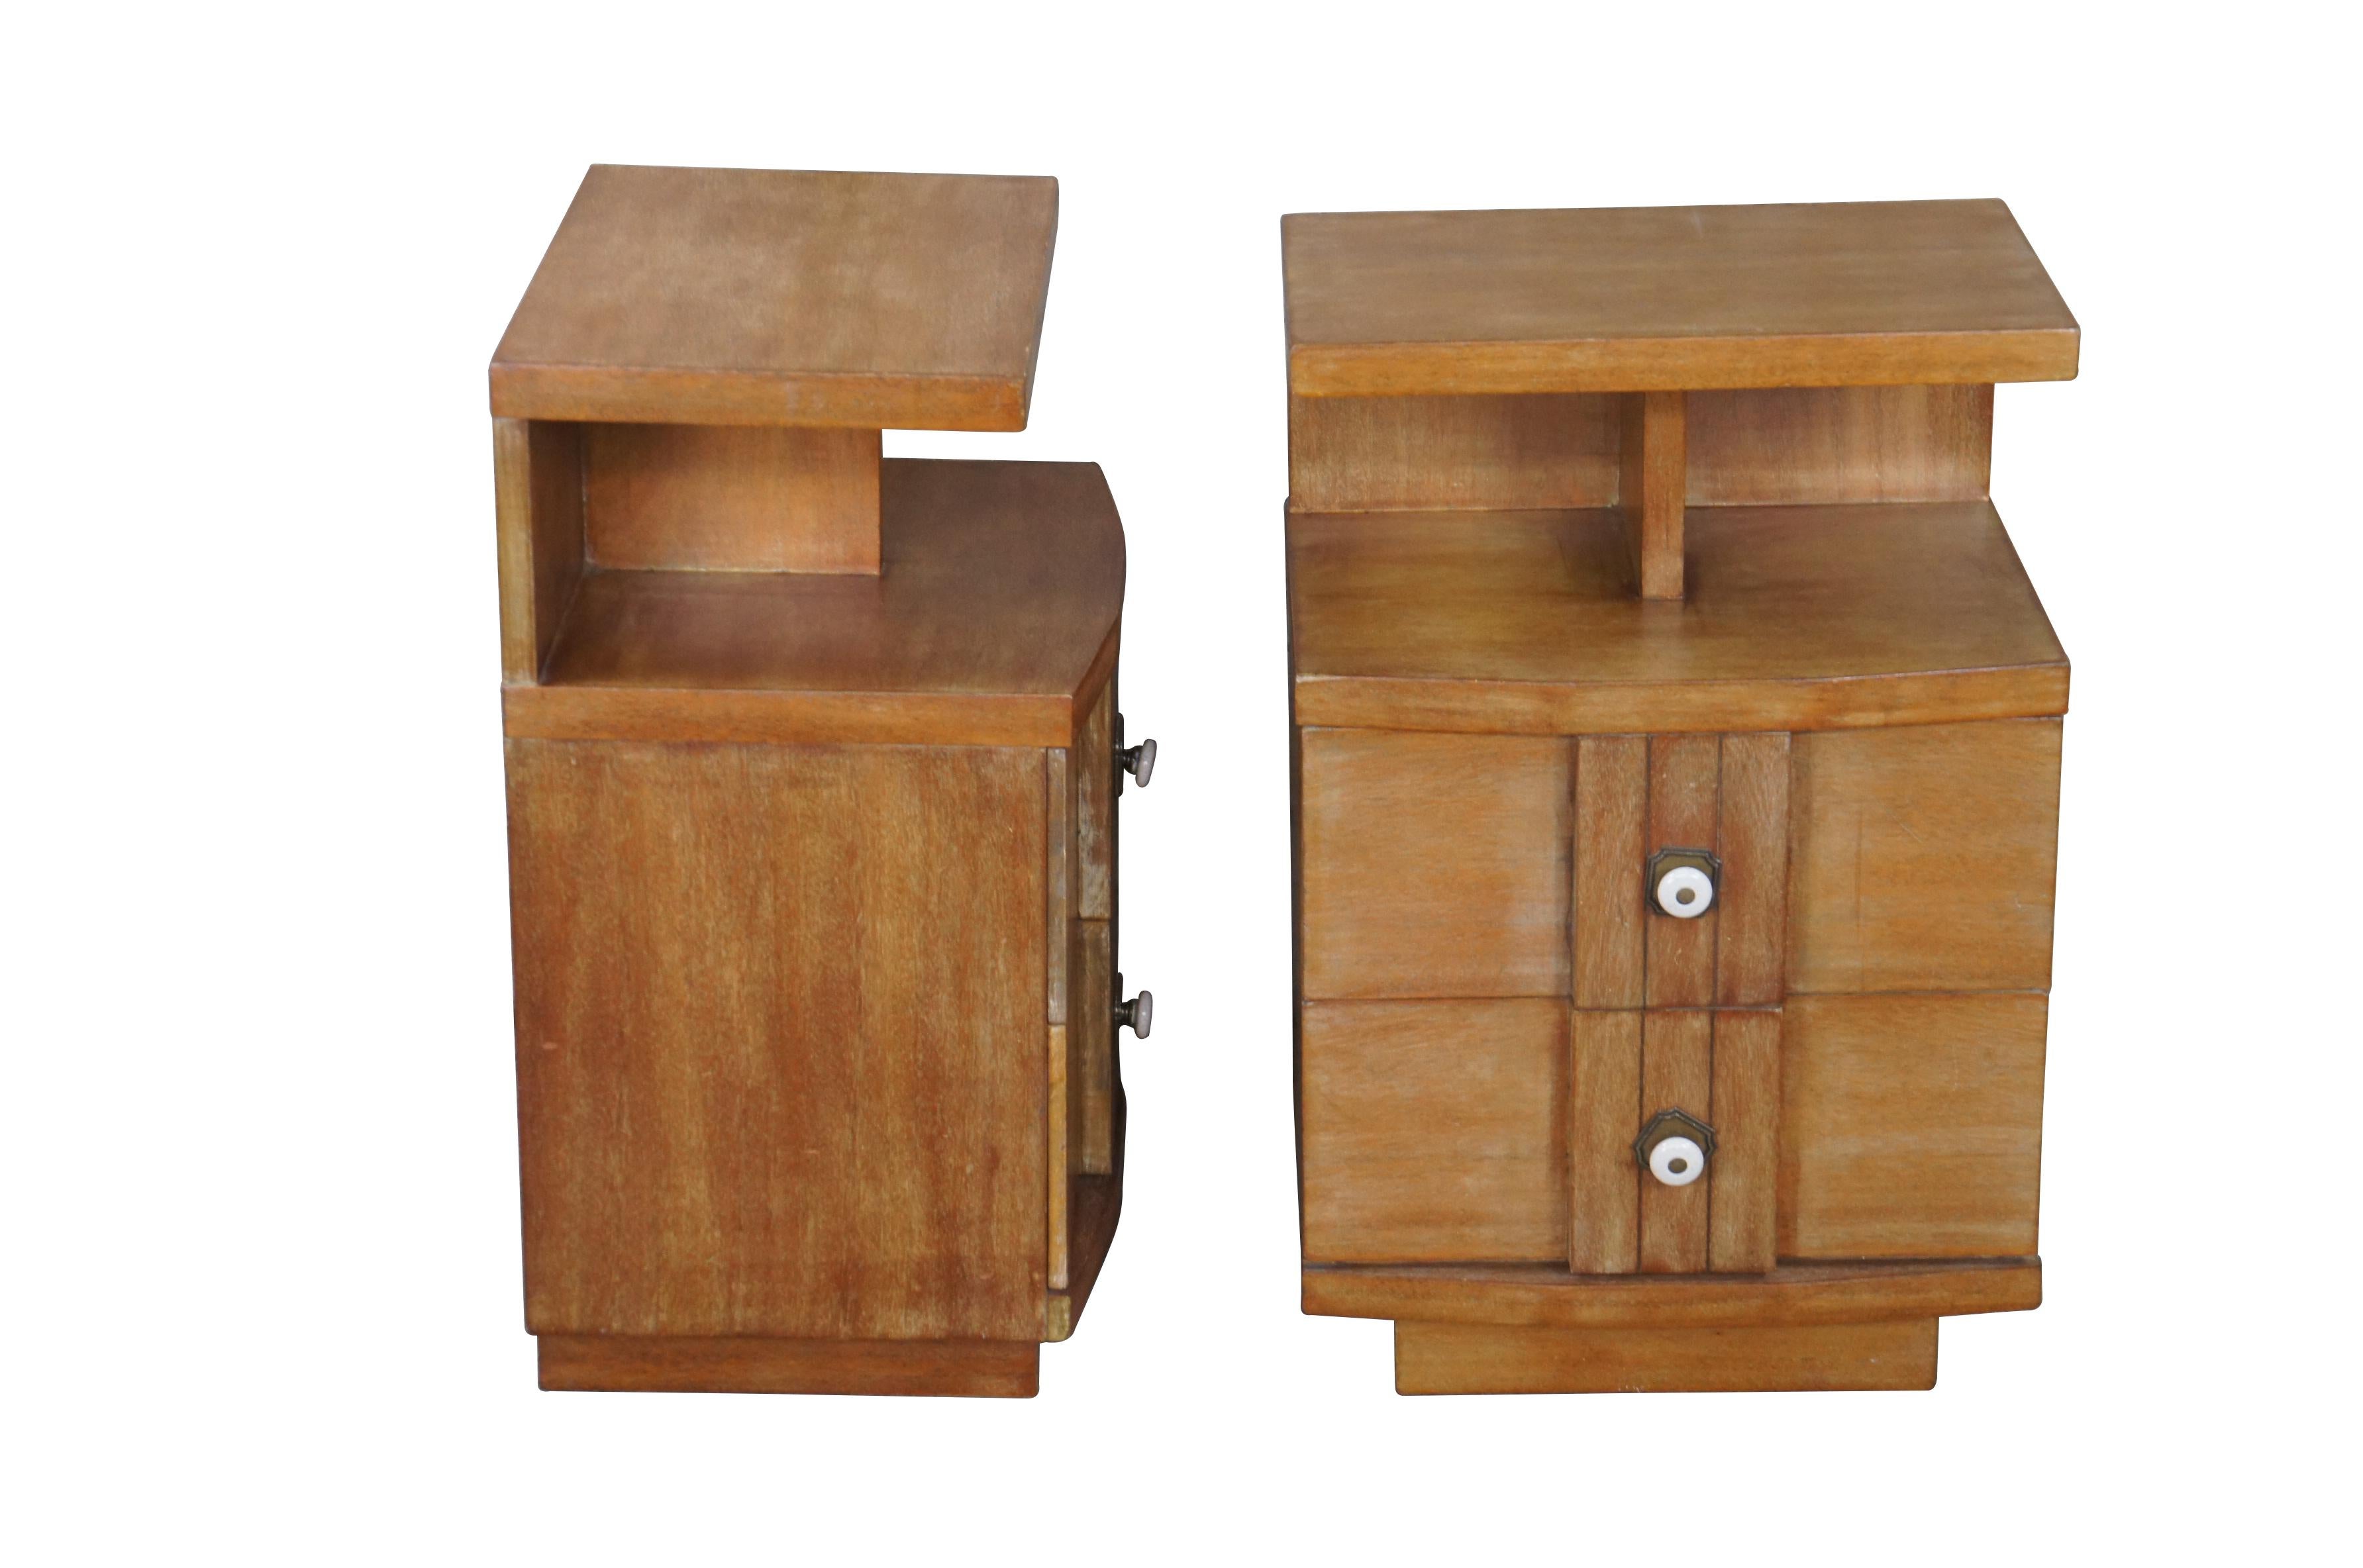 Pair of Kent Coffey end tables, circa second half 20th century.  Made from oak with two dovetailed drawers and a lower divided cubby shelf.  The Titan line was manufactured in the 1970s.  

The Kent-Coffey Manufacturing Company was started in 1907